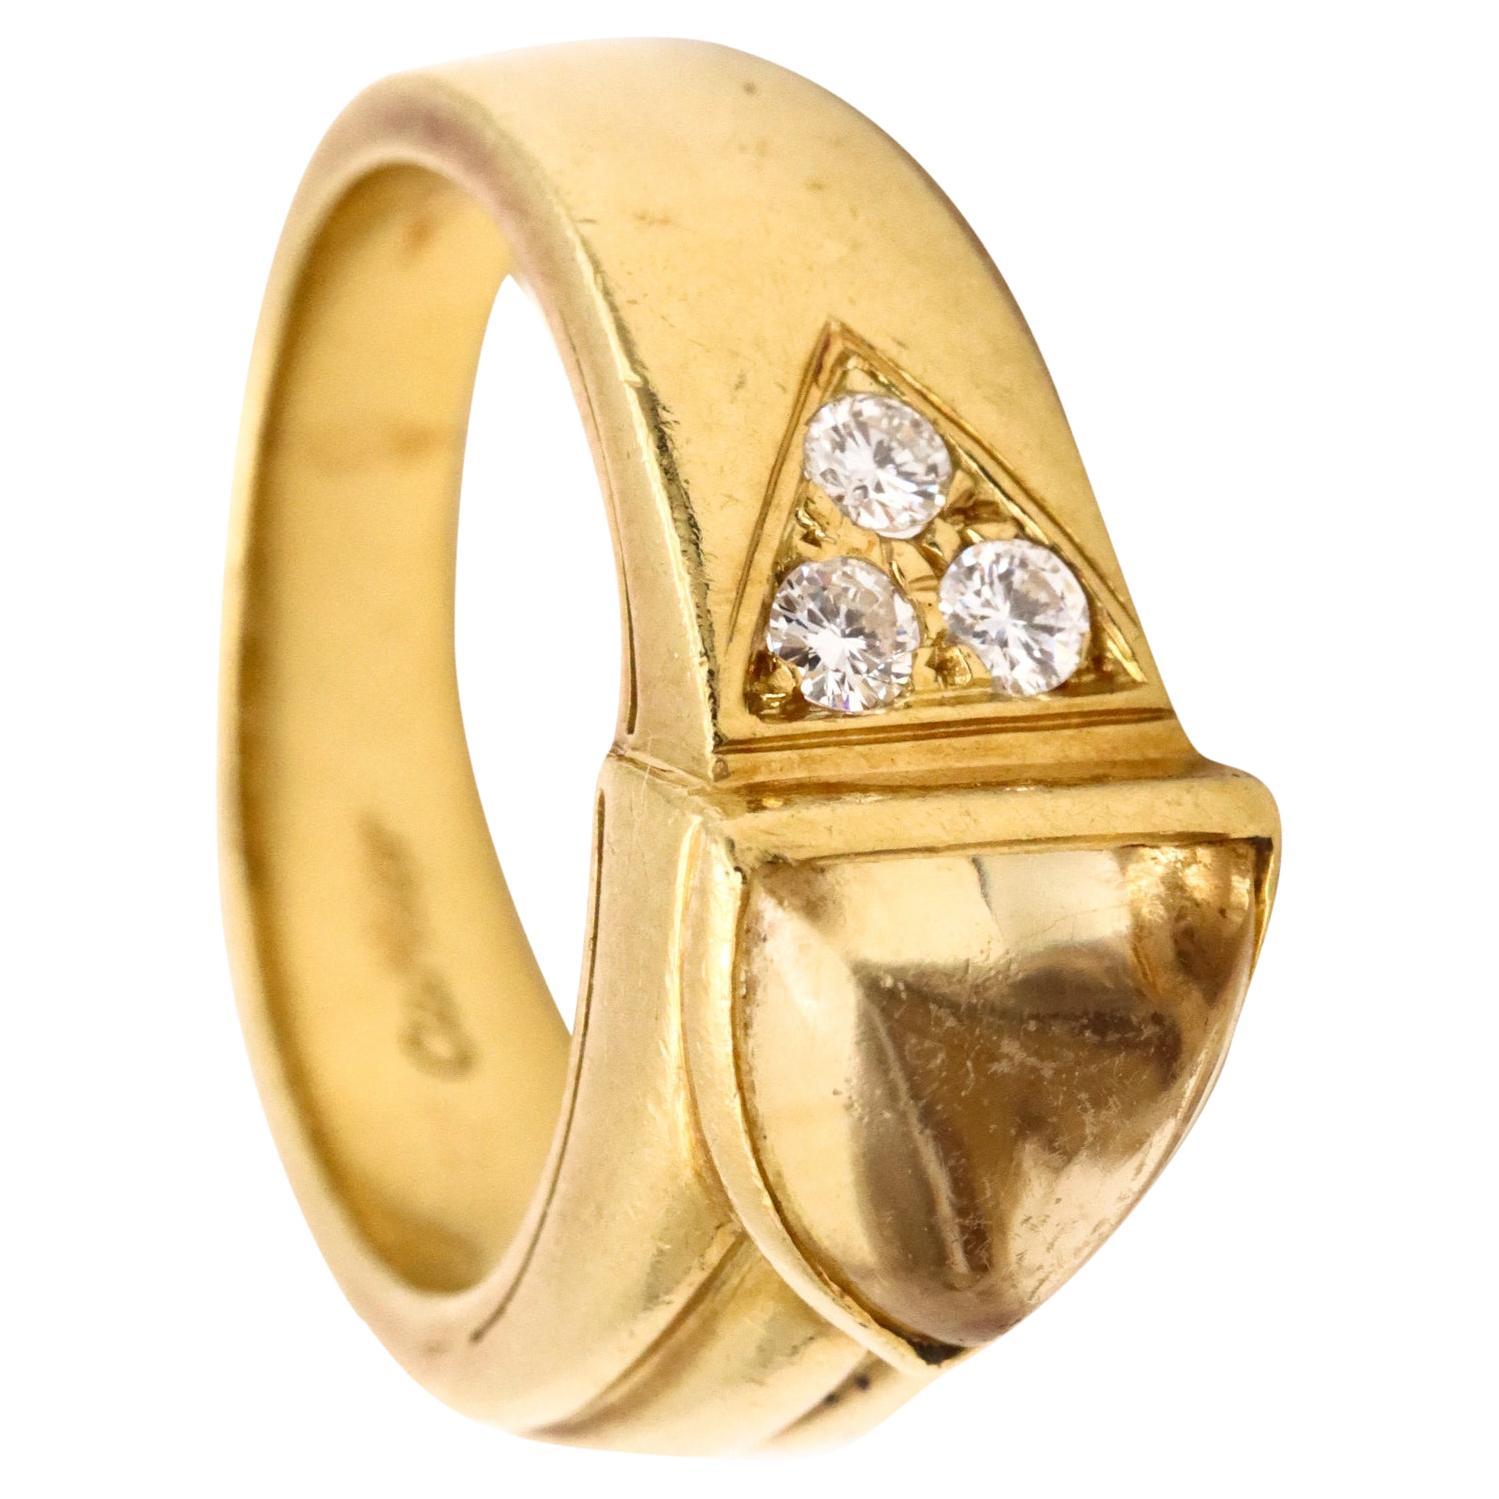 Cartier Vintage Ring in 18Kt Gold with 1.78 Ctw in VS Diamonds and Citrine